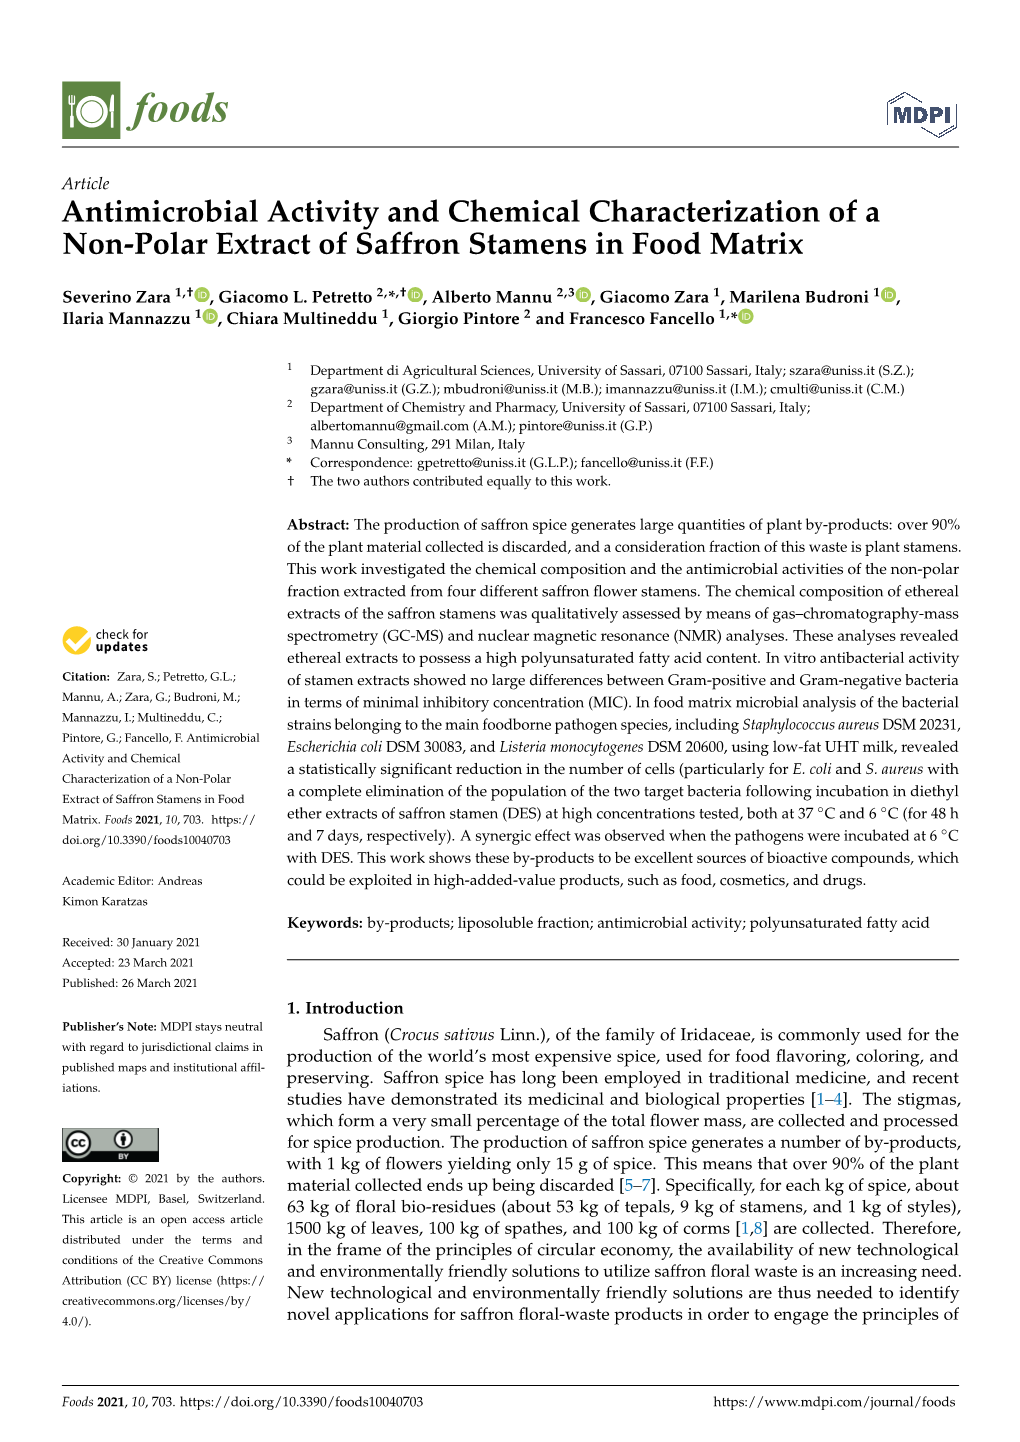 Antimicrobial Activity and Chemical Characterization of a Non-Polar Extract of Saffron Stamens in Food Matrix